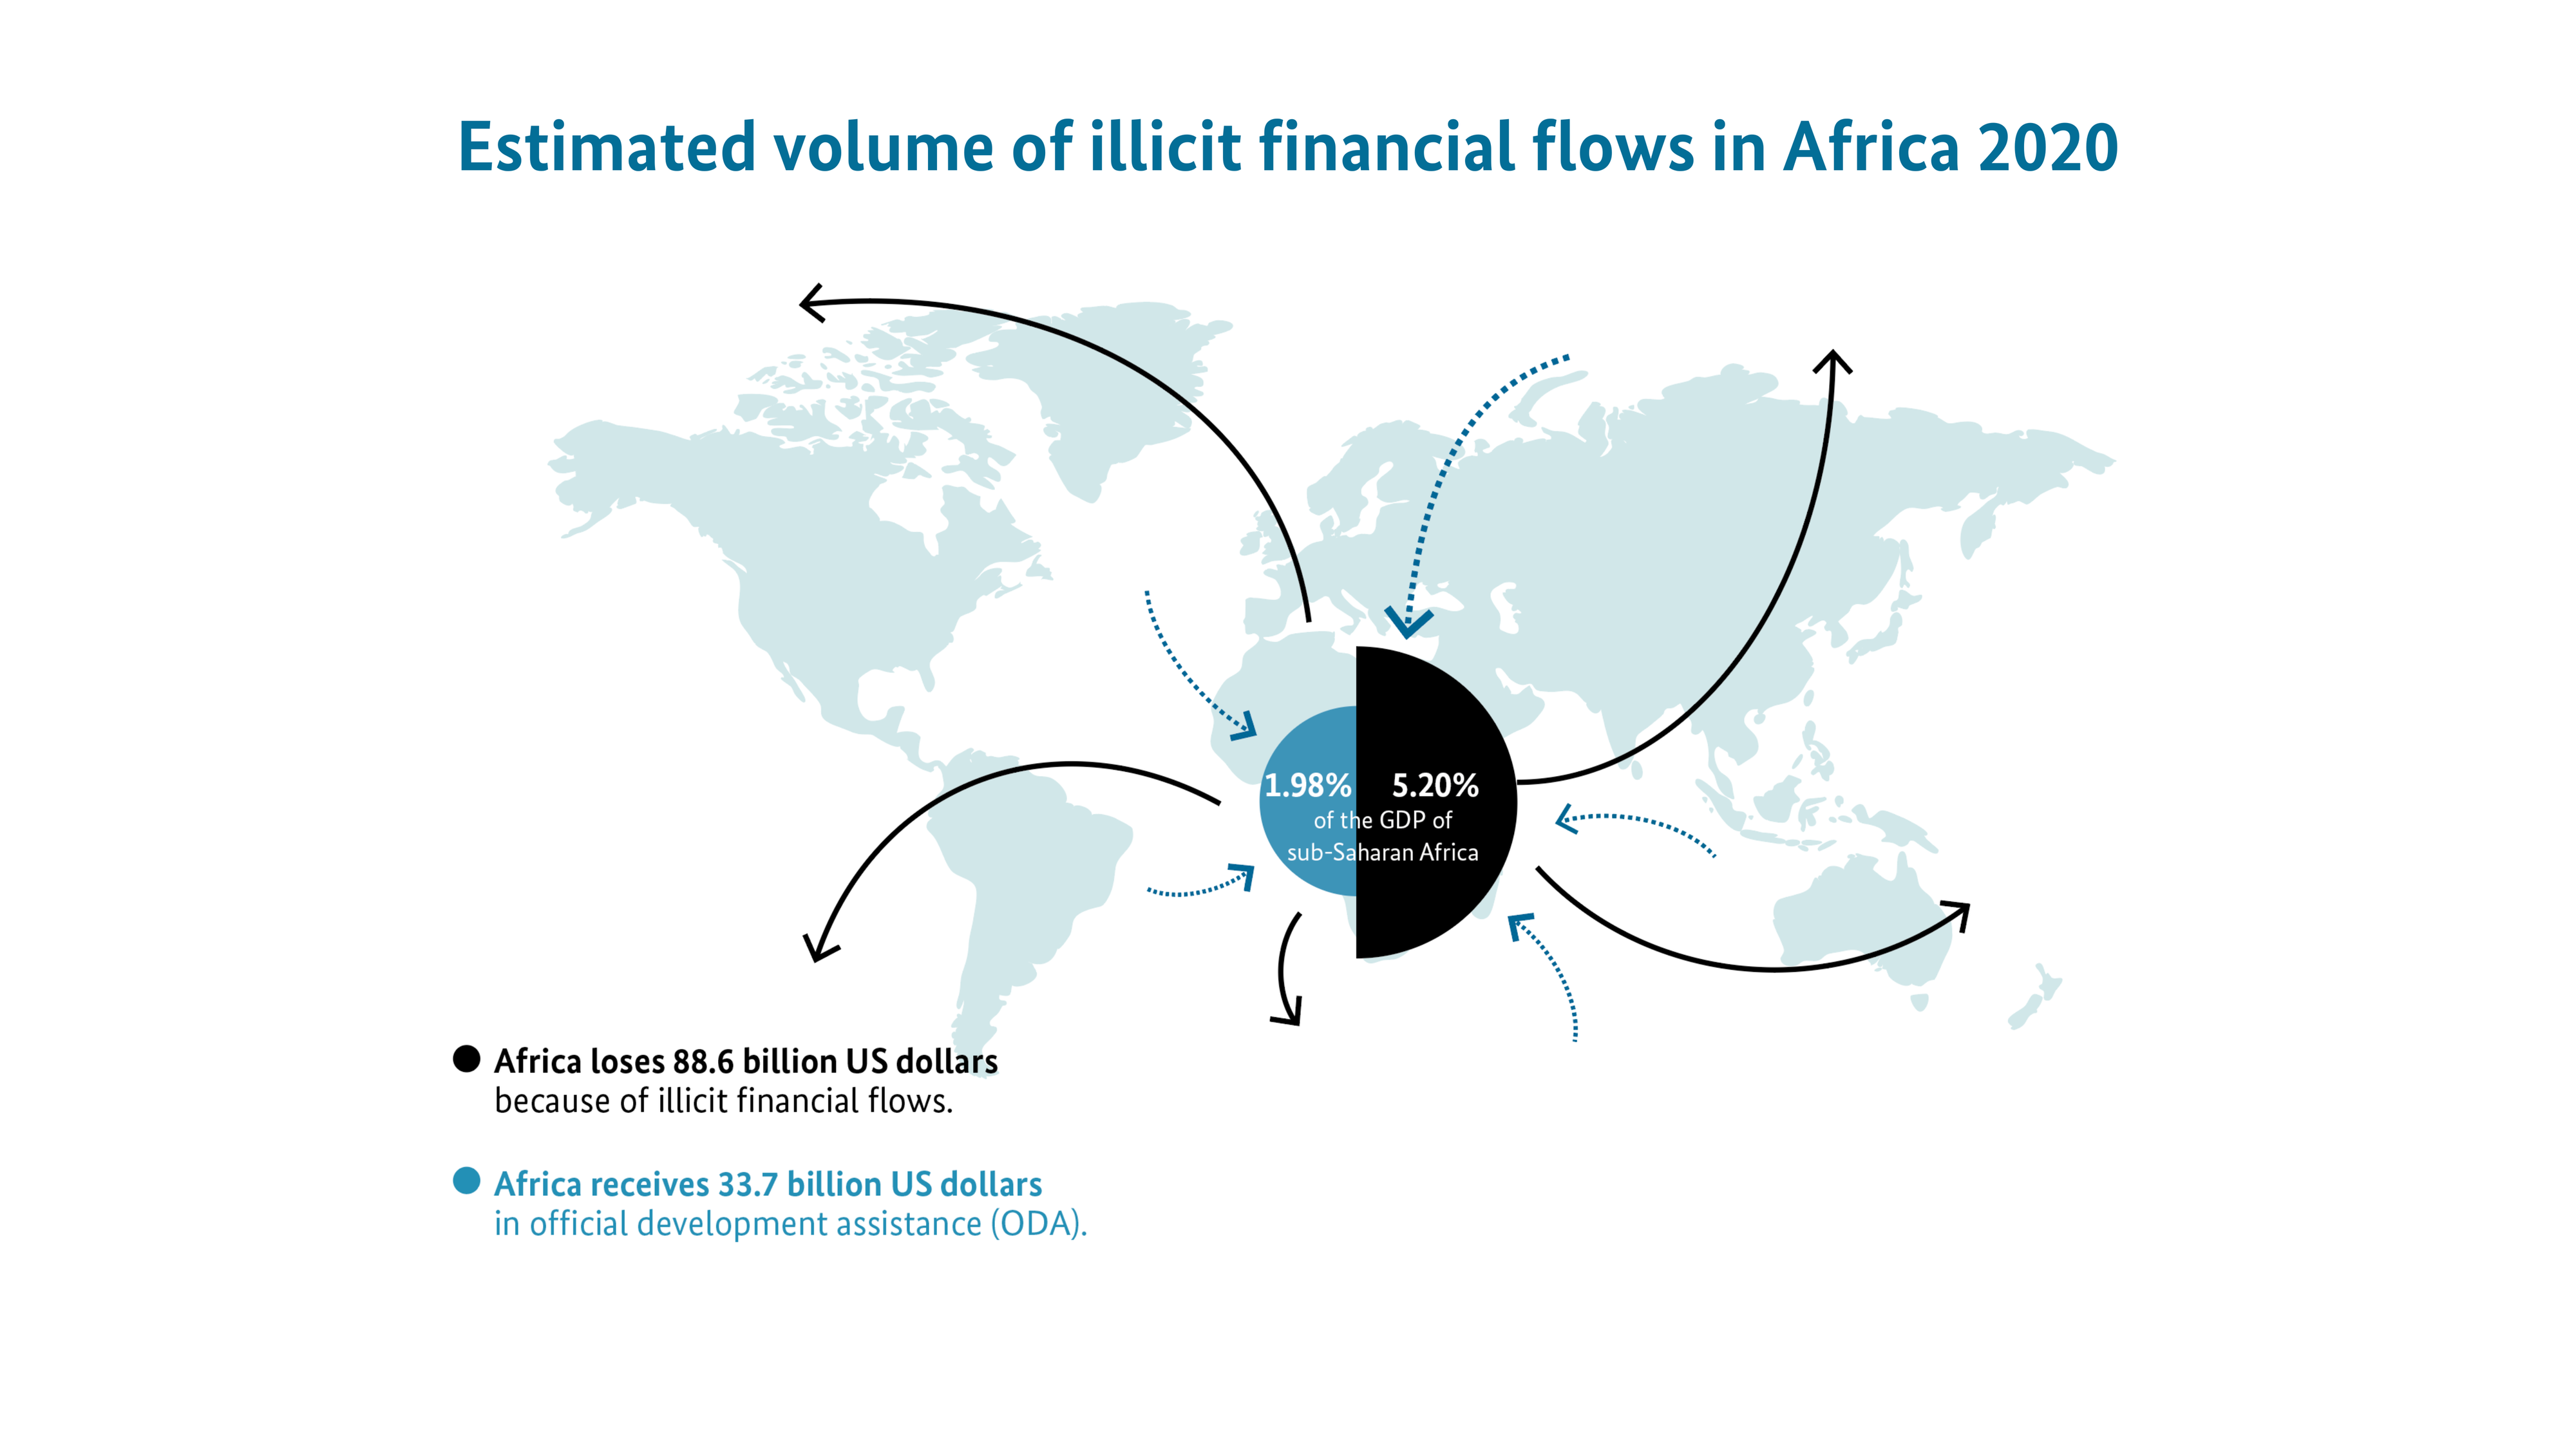 Estimated volume of illicit financial flows in Africa 2020: Africa loses 88.6 billion US dollars because of illicit financial flows (5.2% of the GDP of sub-Saharan Africa). Africa receives 33.7 billion US dollars in official development assistance (ODA) (1.98% of the GDP of sub-Saharan Africa).